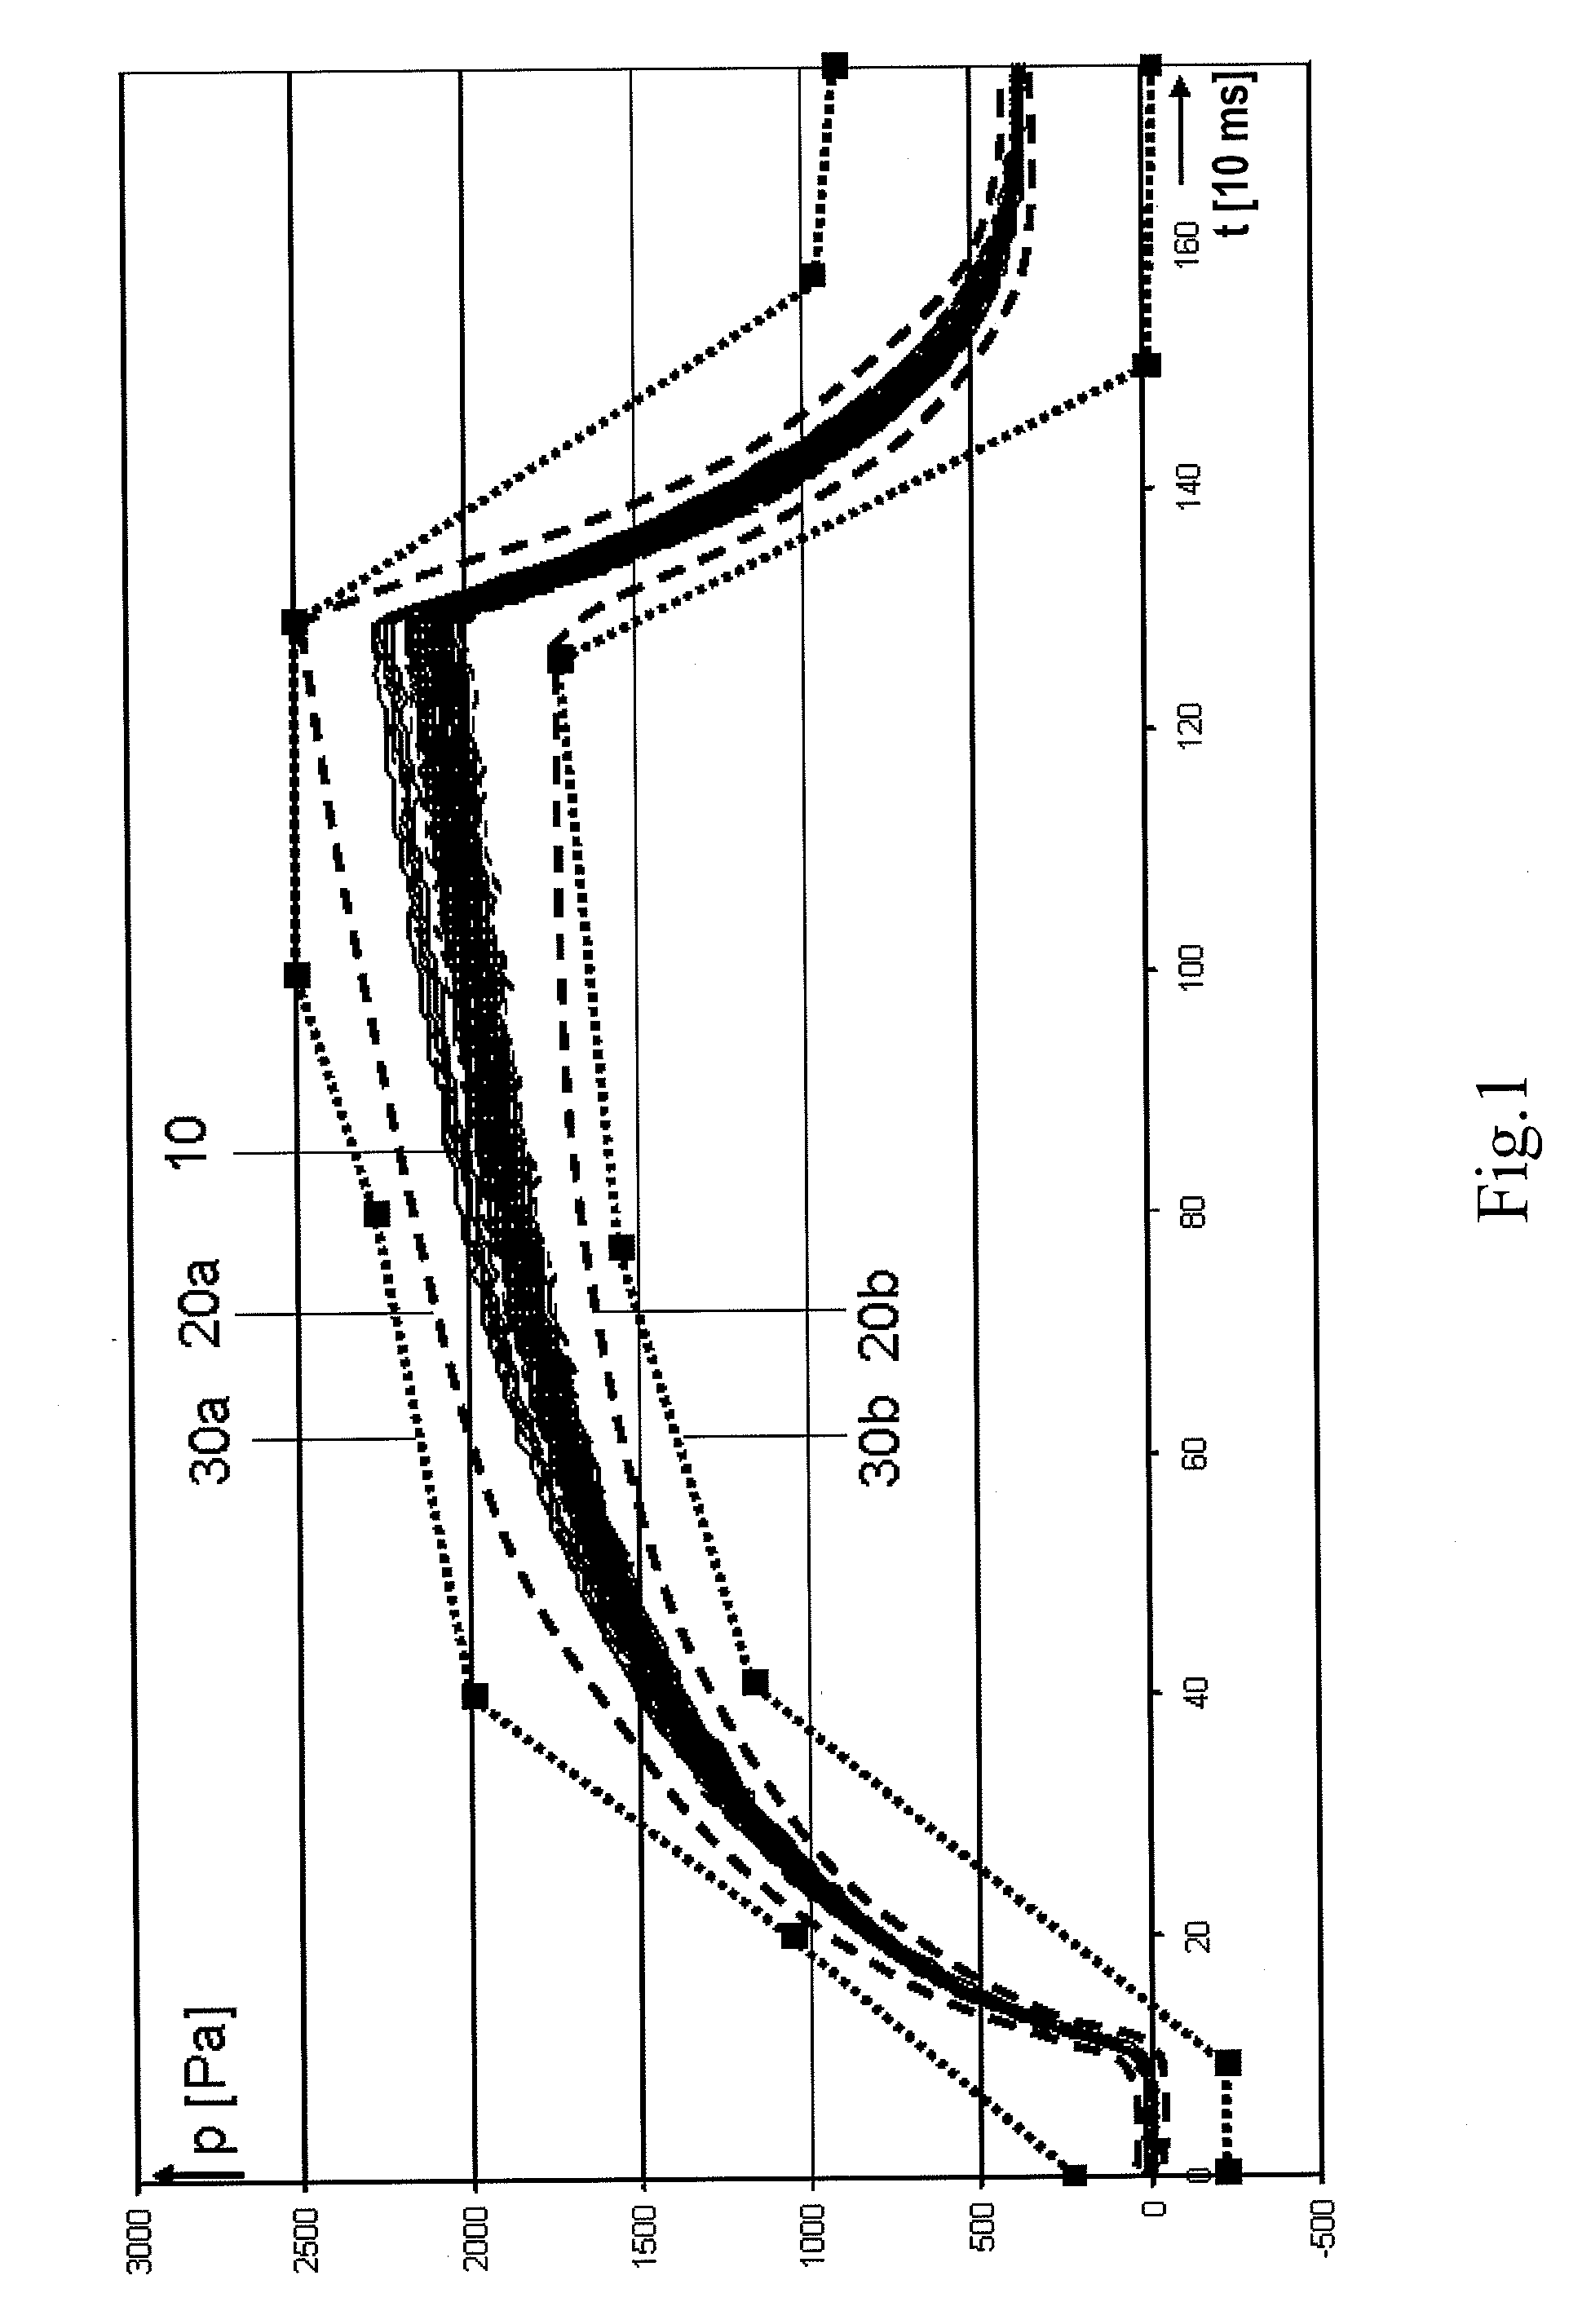 Method for monitoring a fluid transfer process